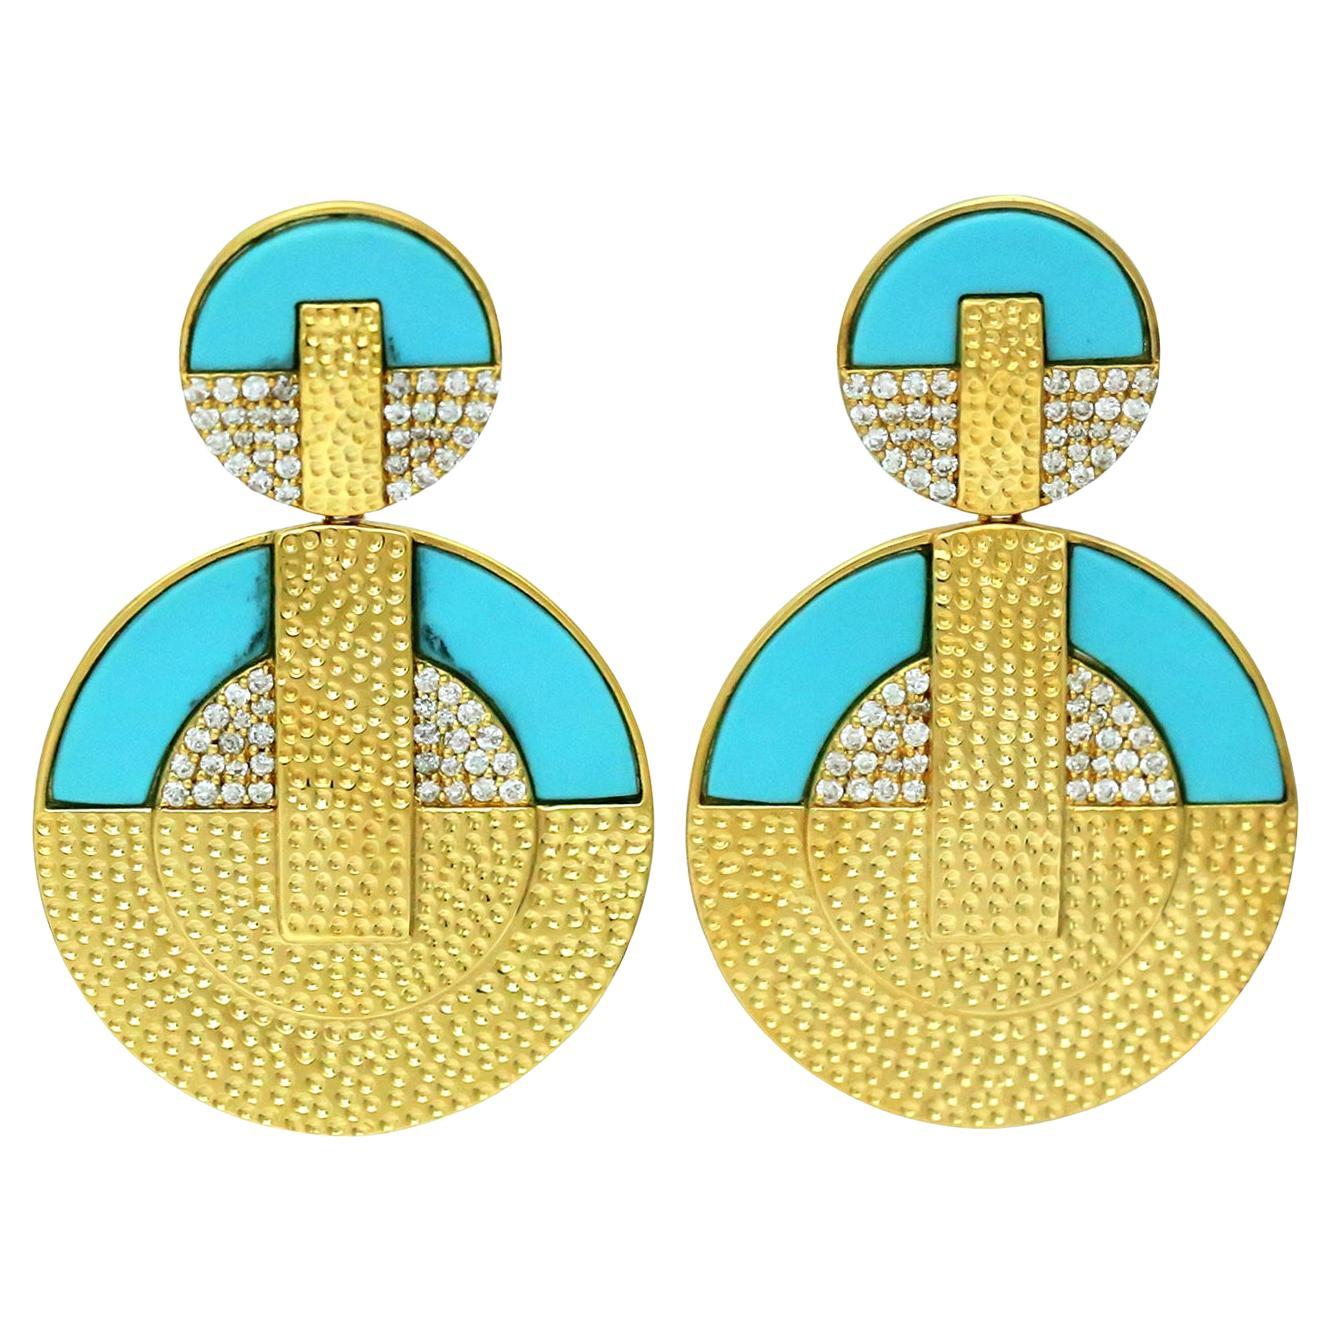 Pendulam Shaped Turquoise & Diamonds Earrings Made In 18k Yellow Gold For Sale